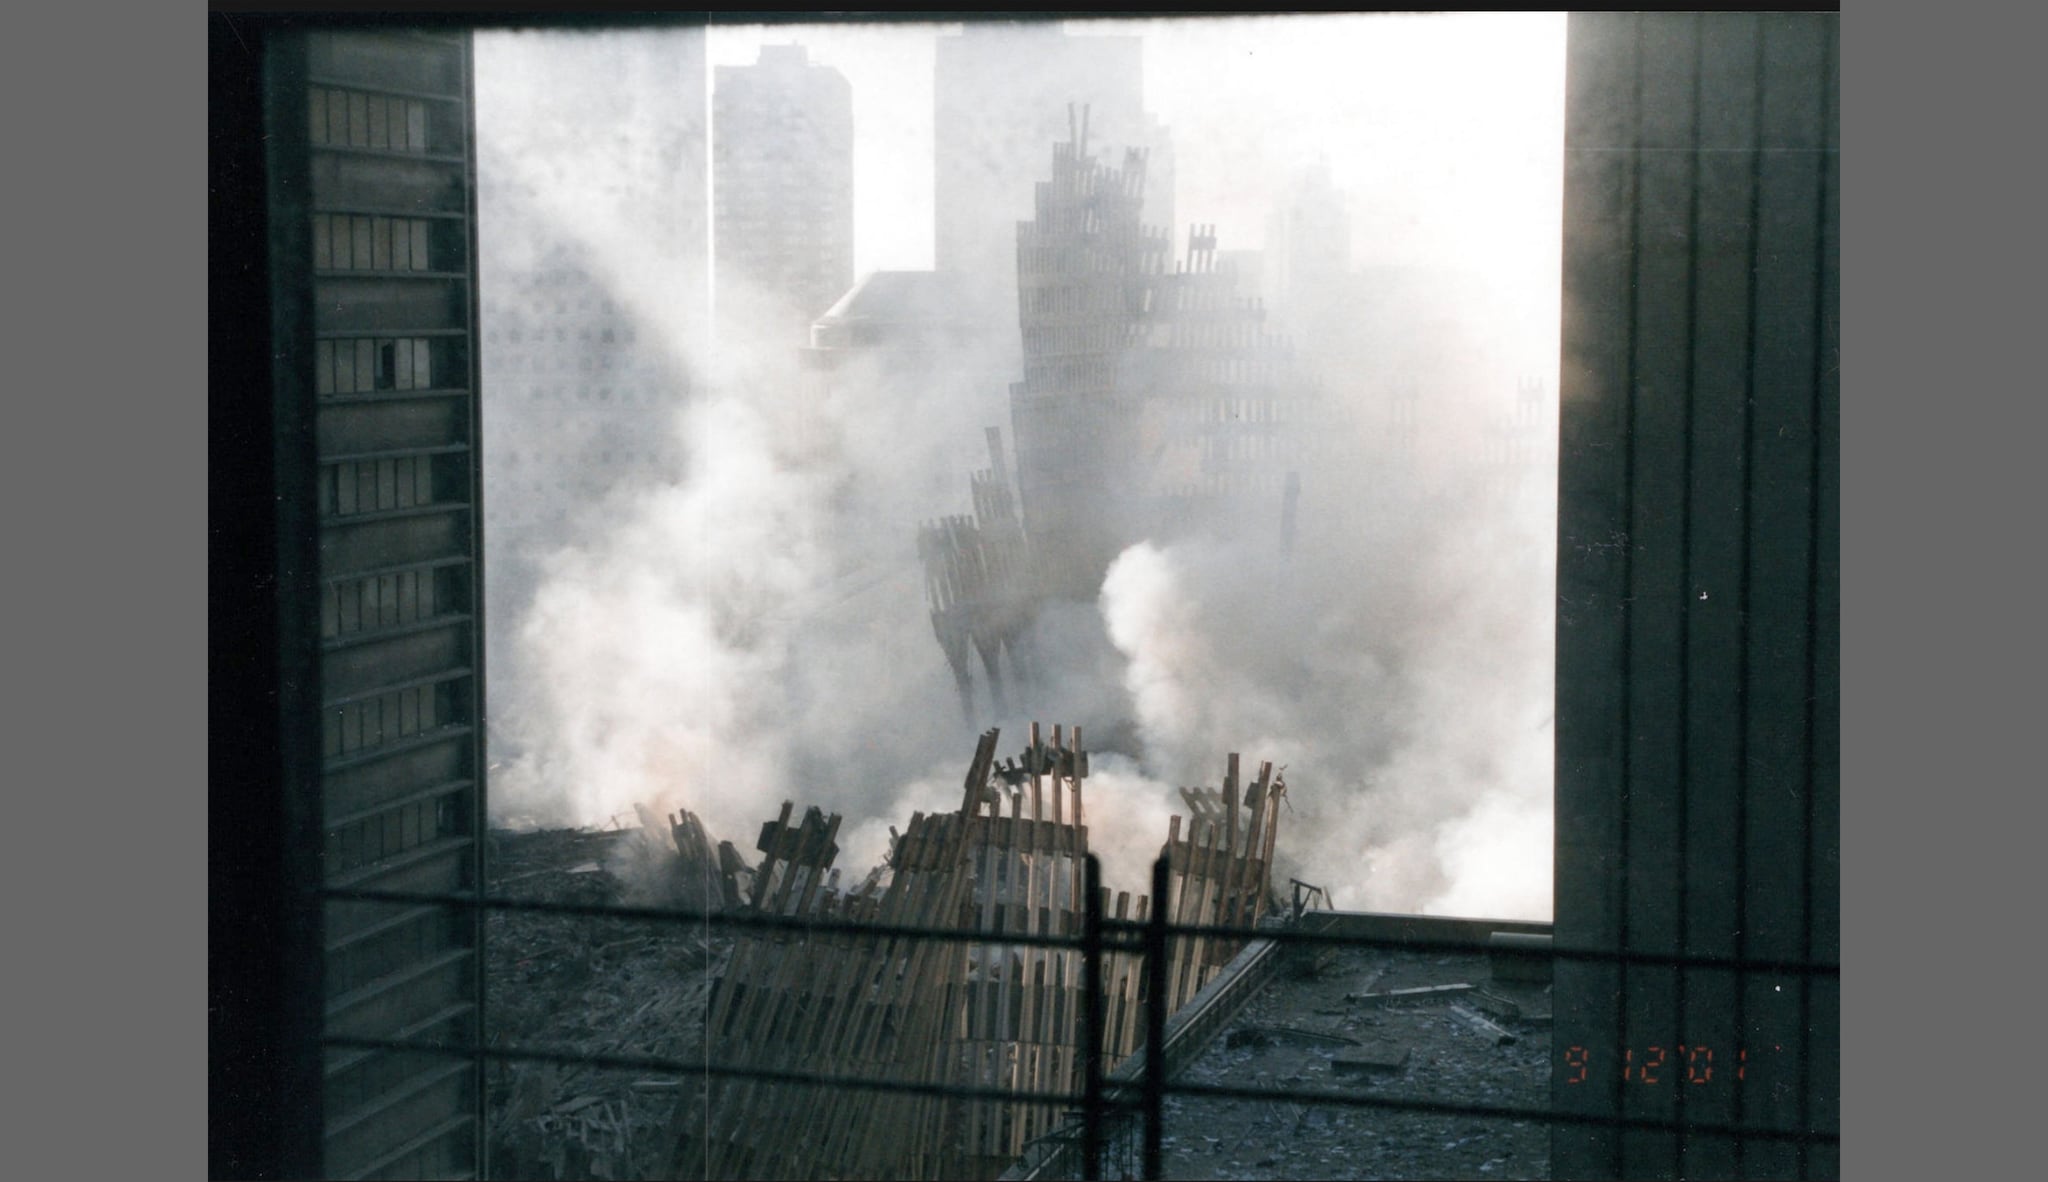 Photo of the fallen World Trade Center towers from a window on September 12, 2001. 